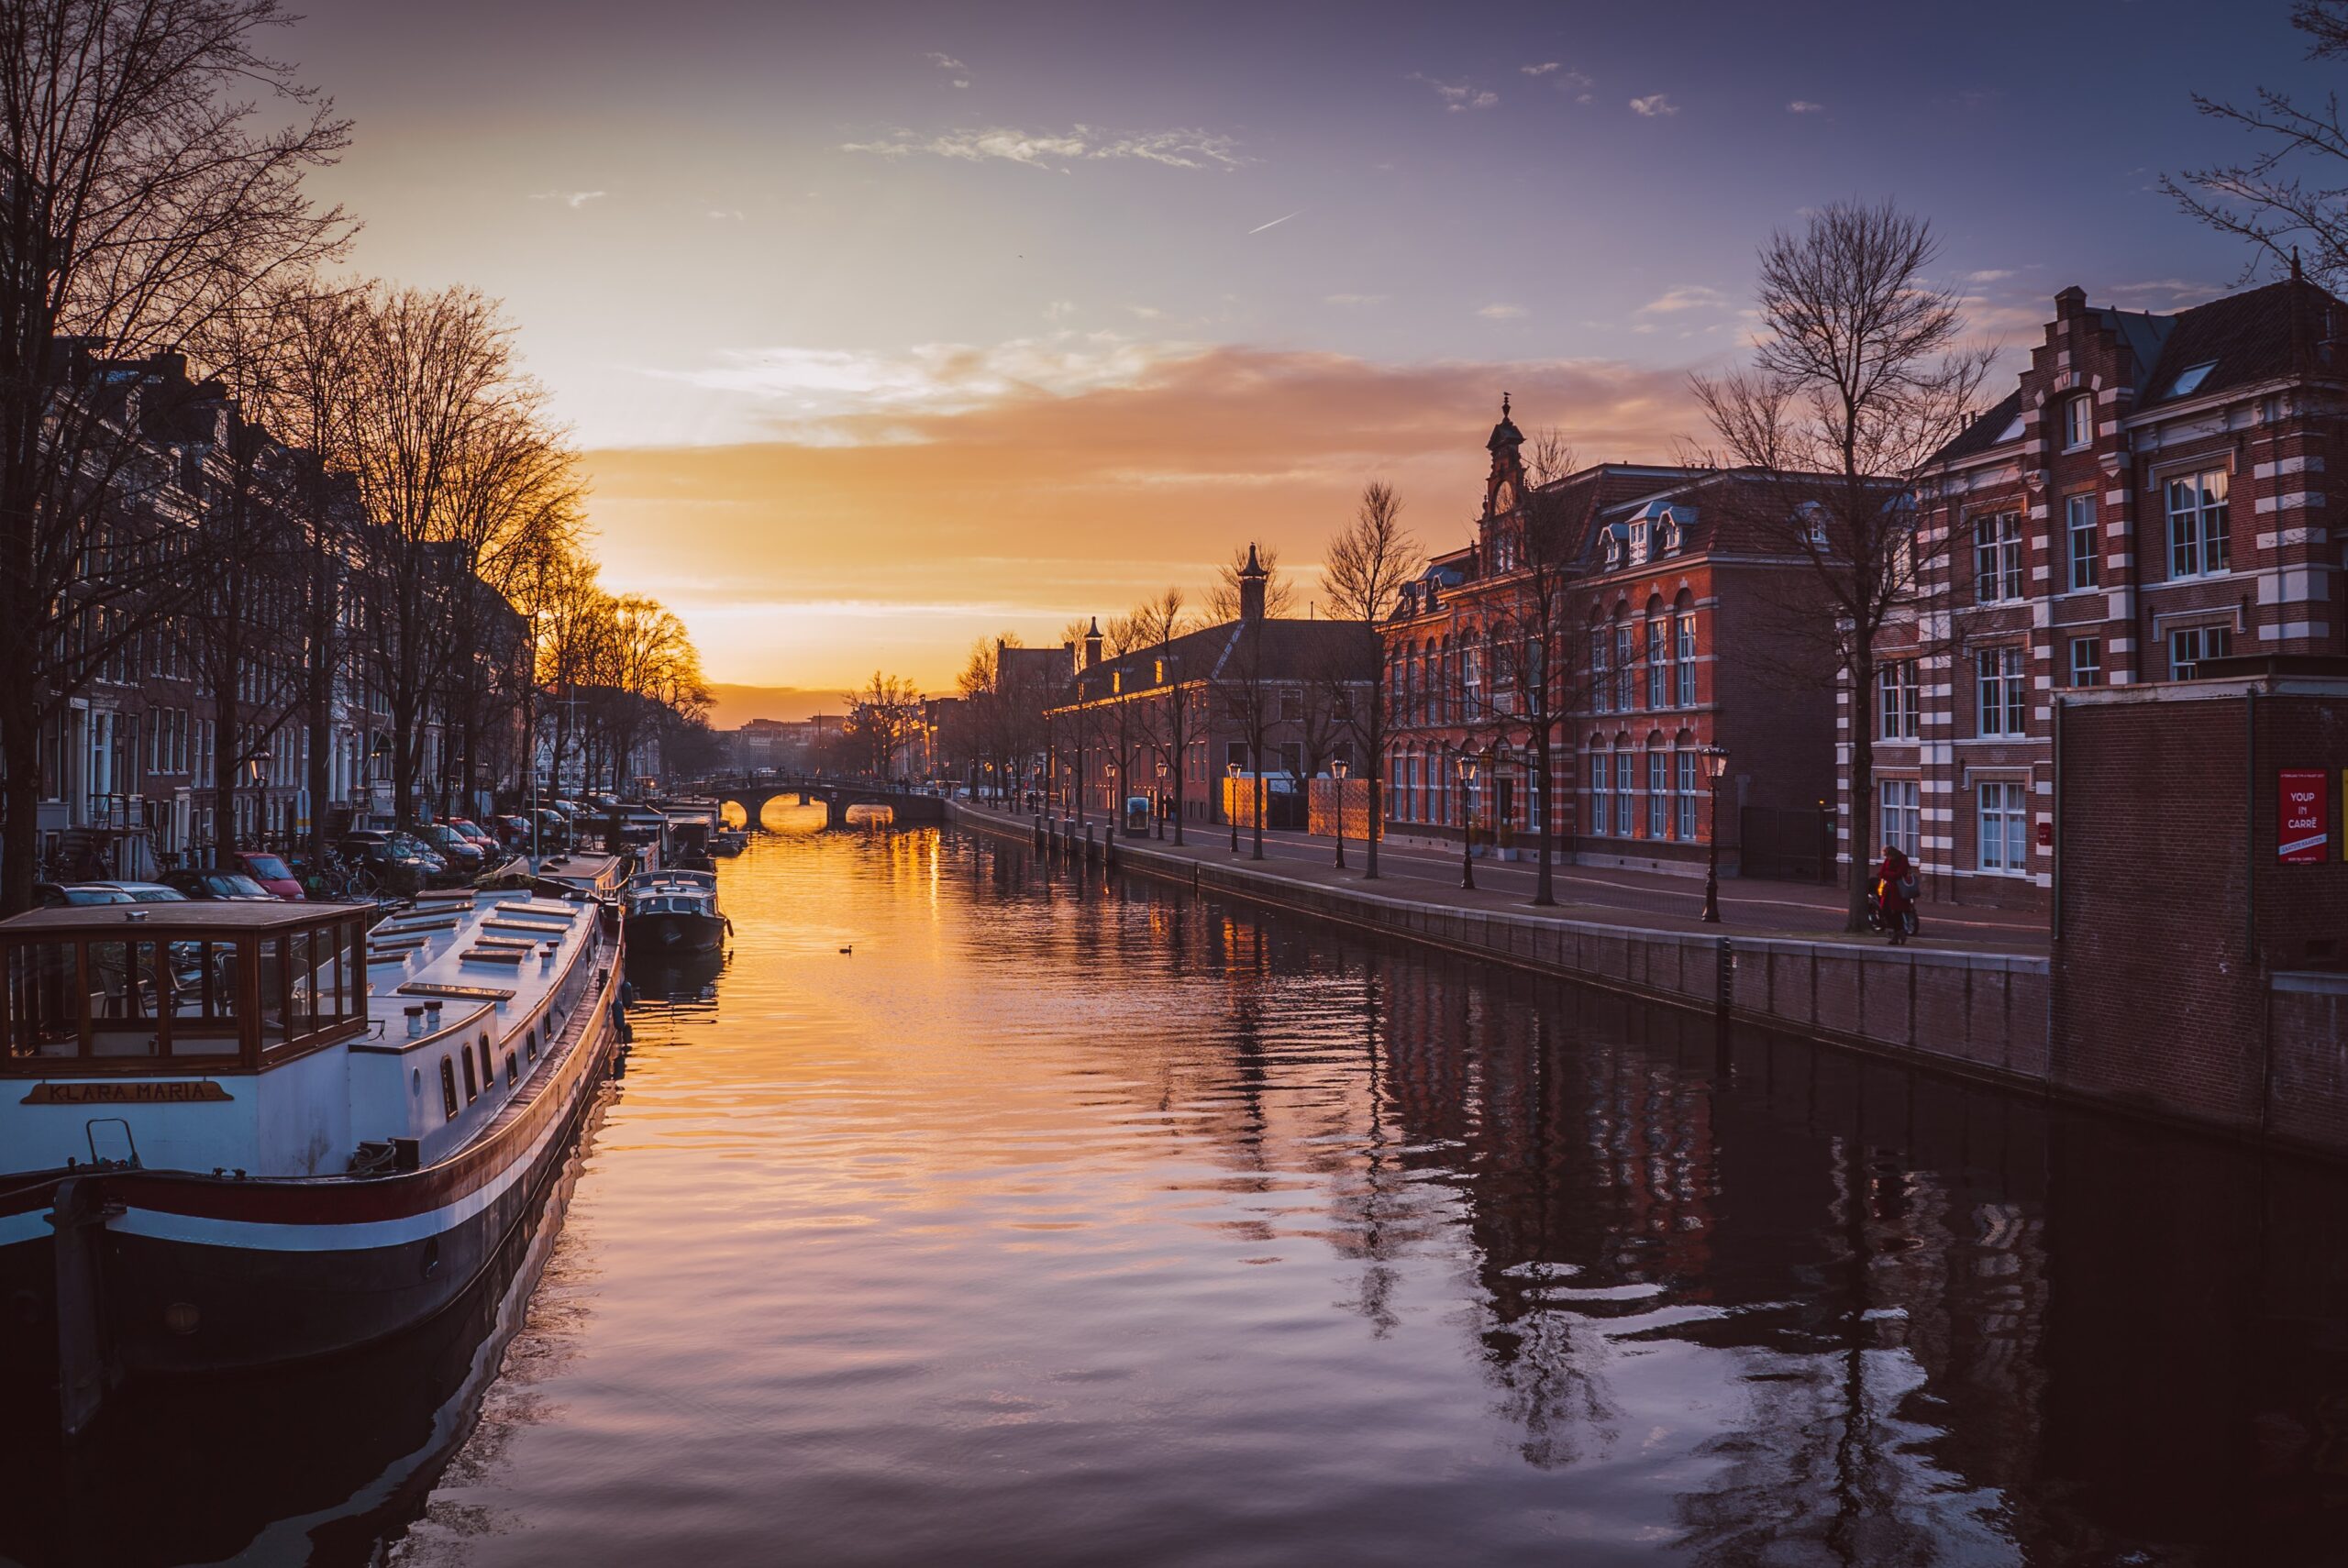 Photo of a canal in Amsterdam